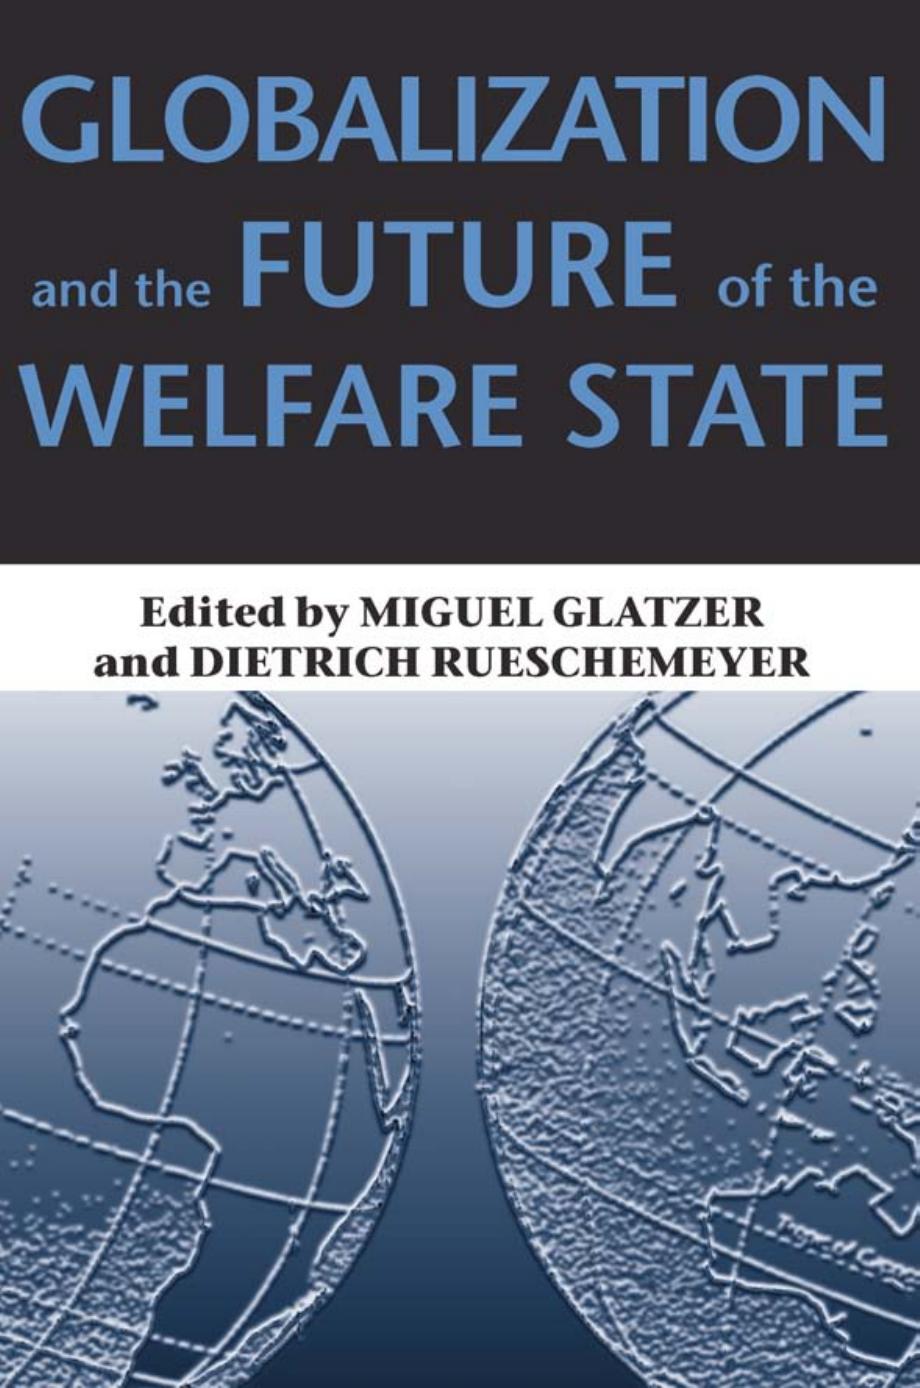 Globalization and the Future of the Welfare State by Miguel Glatzer; Dietrich Rueschemeyer